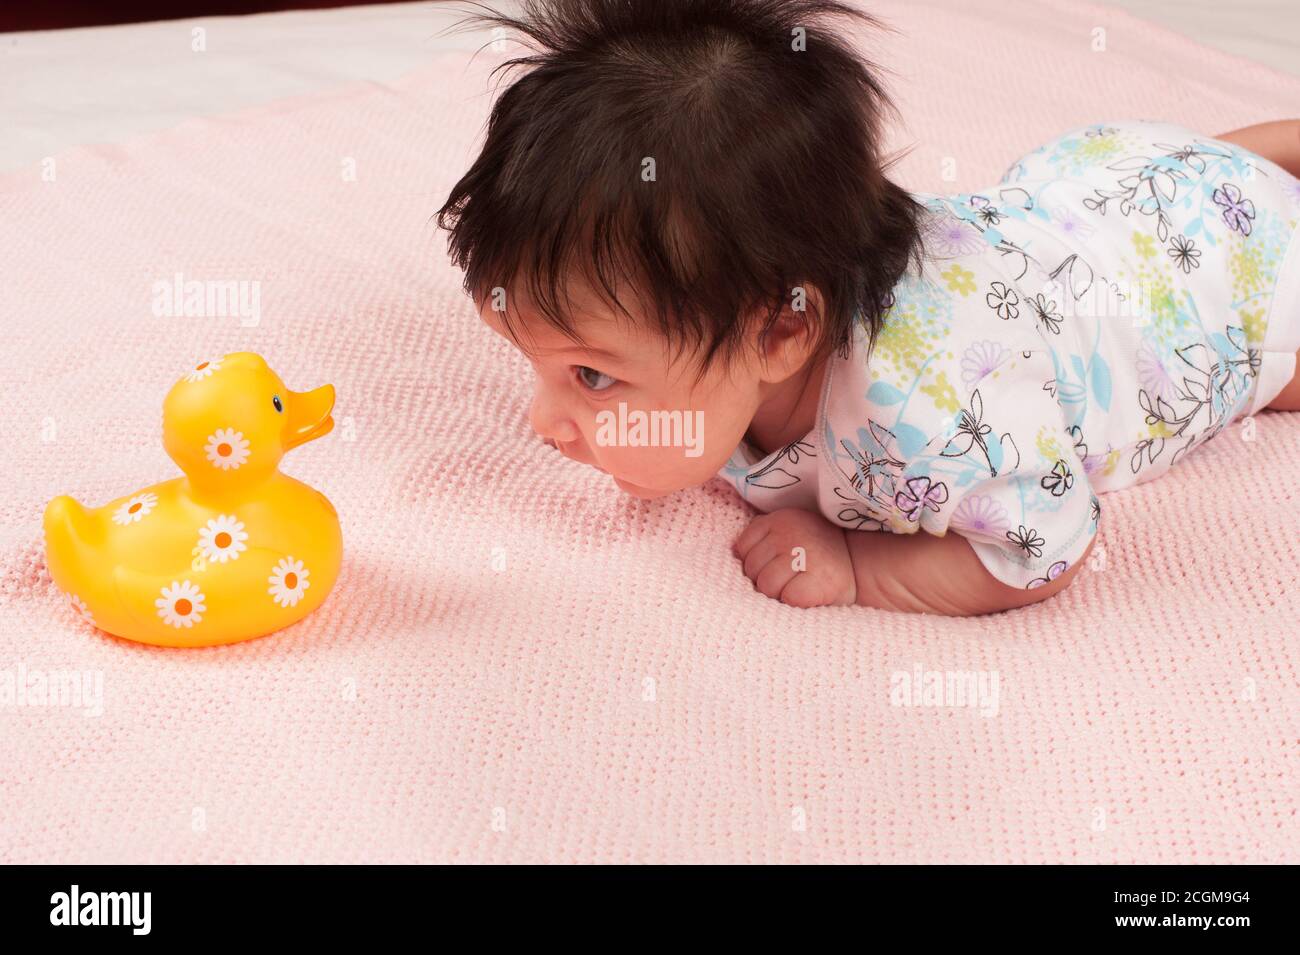 newborn baby girl one month old on stomach holding head up to look at yellow duck toy Stock Photo